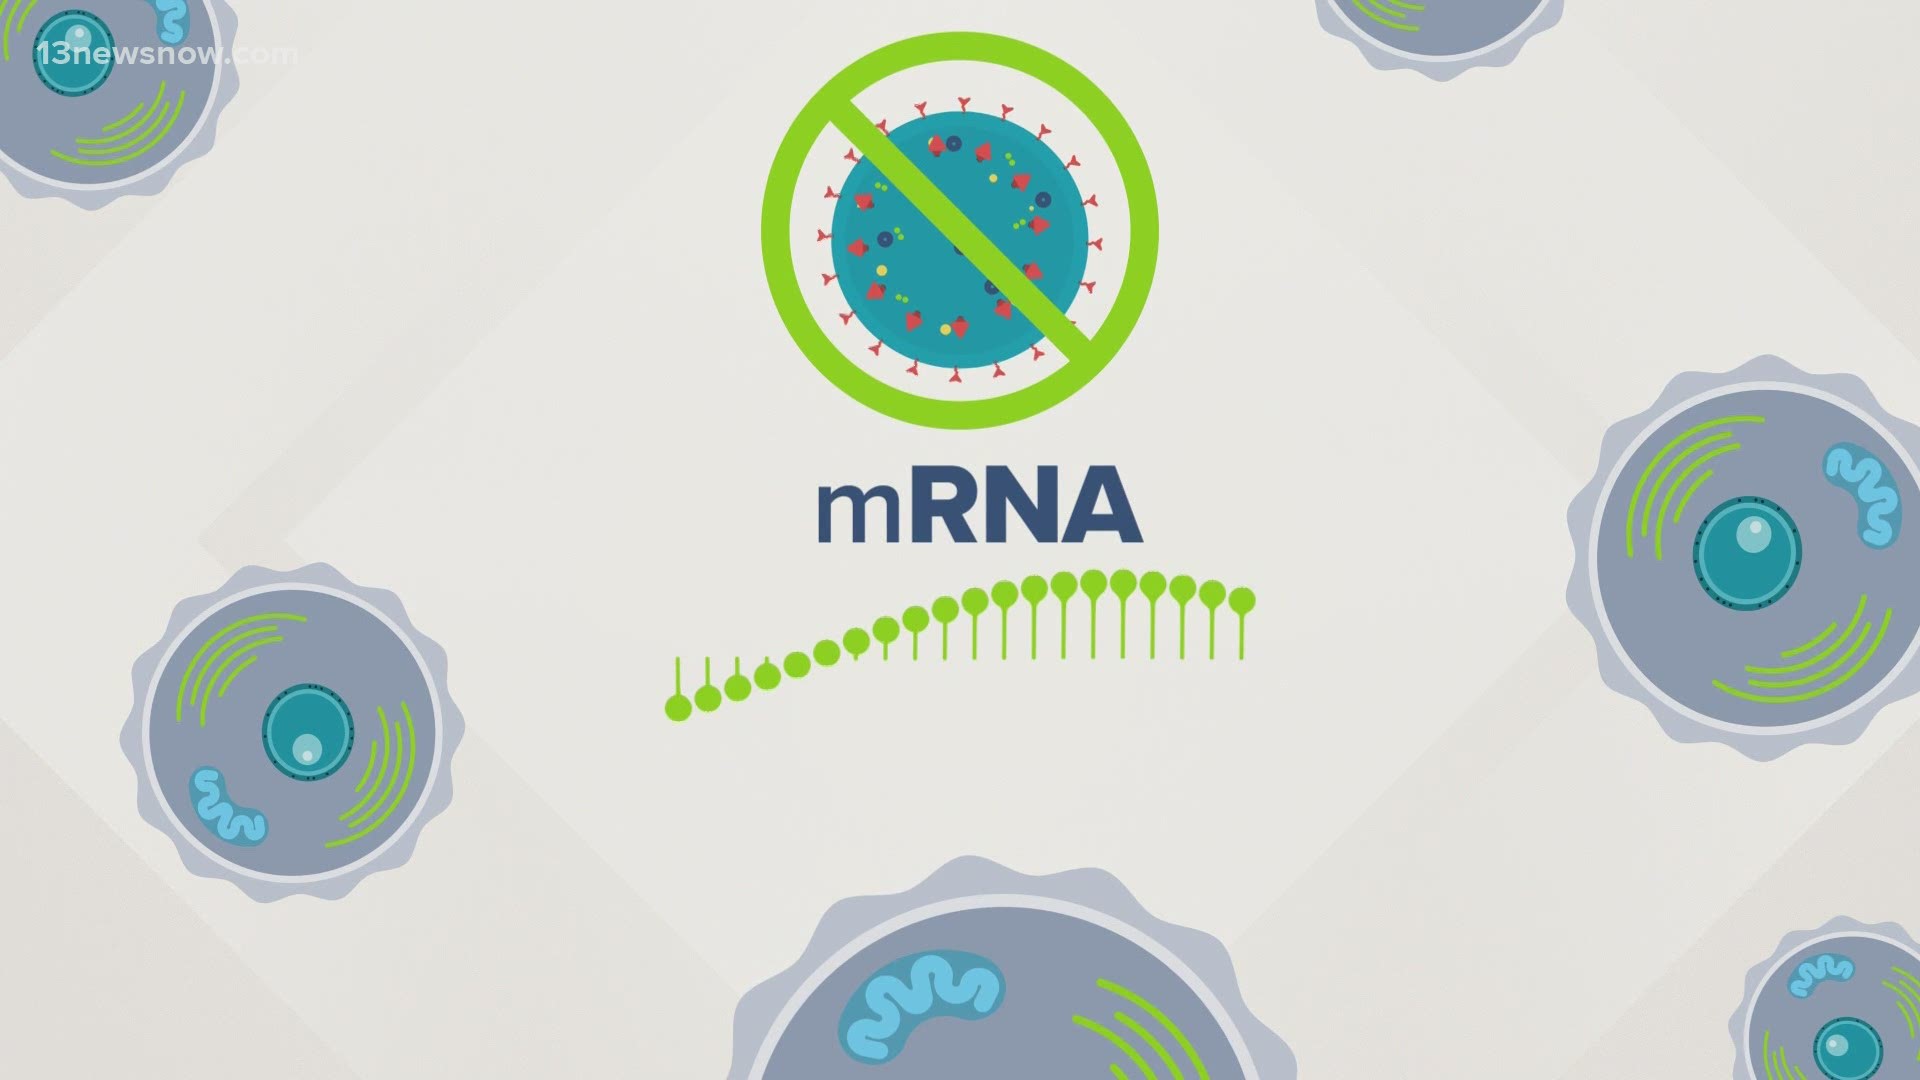 mRNA vaccines are a new type of vaccine to protect against infectious diseases.